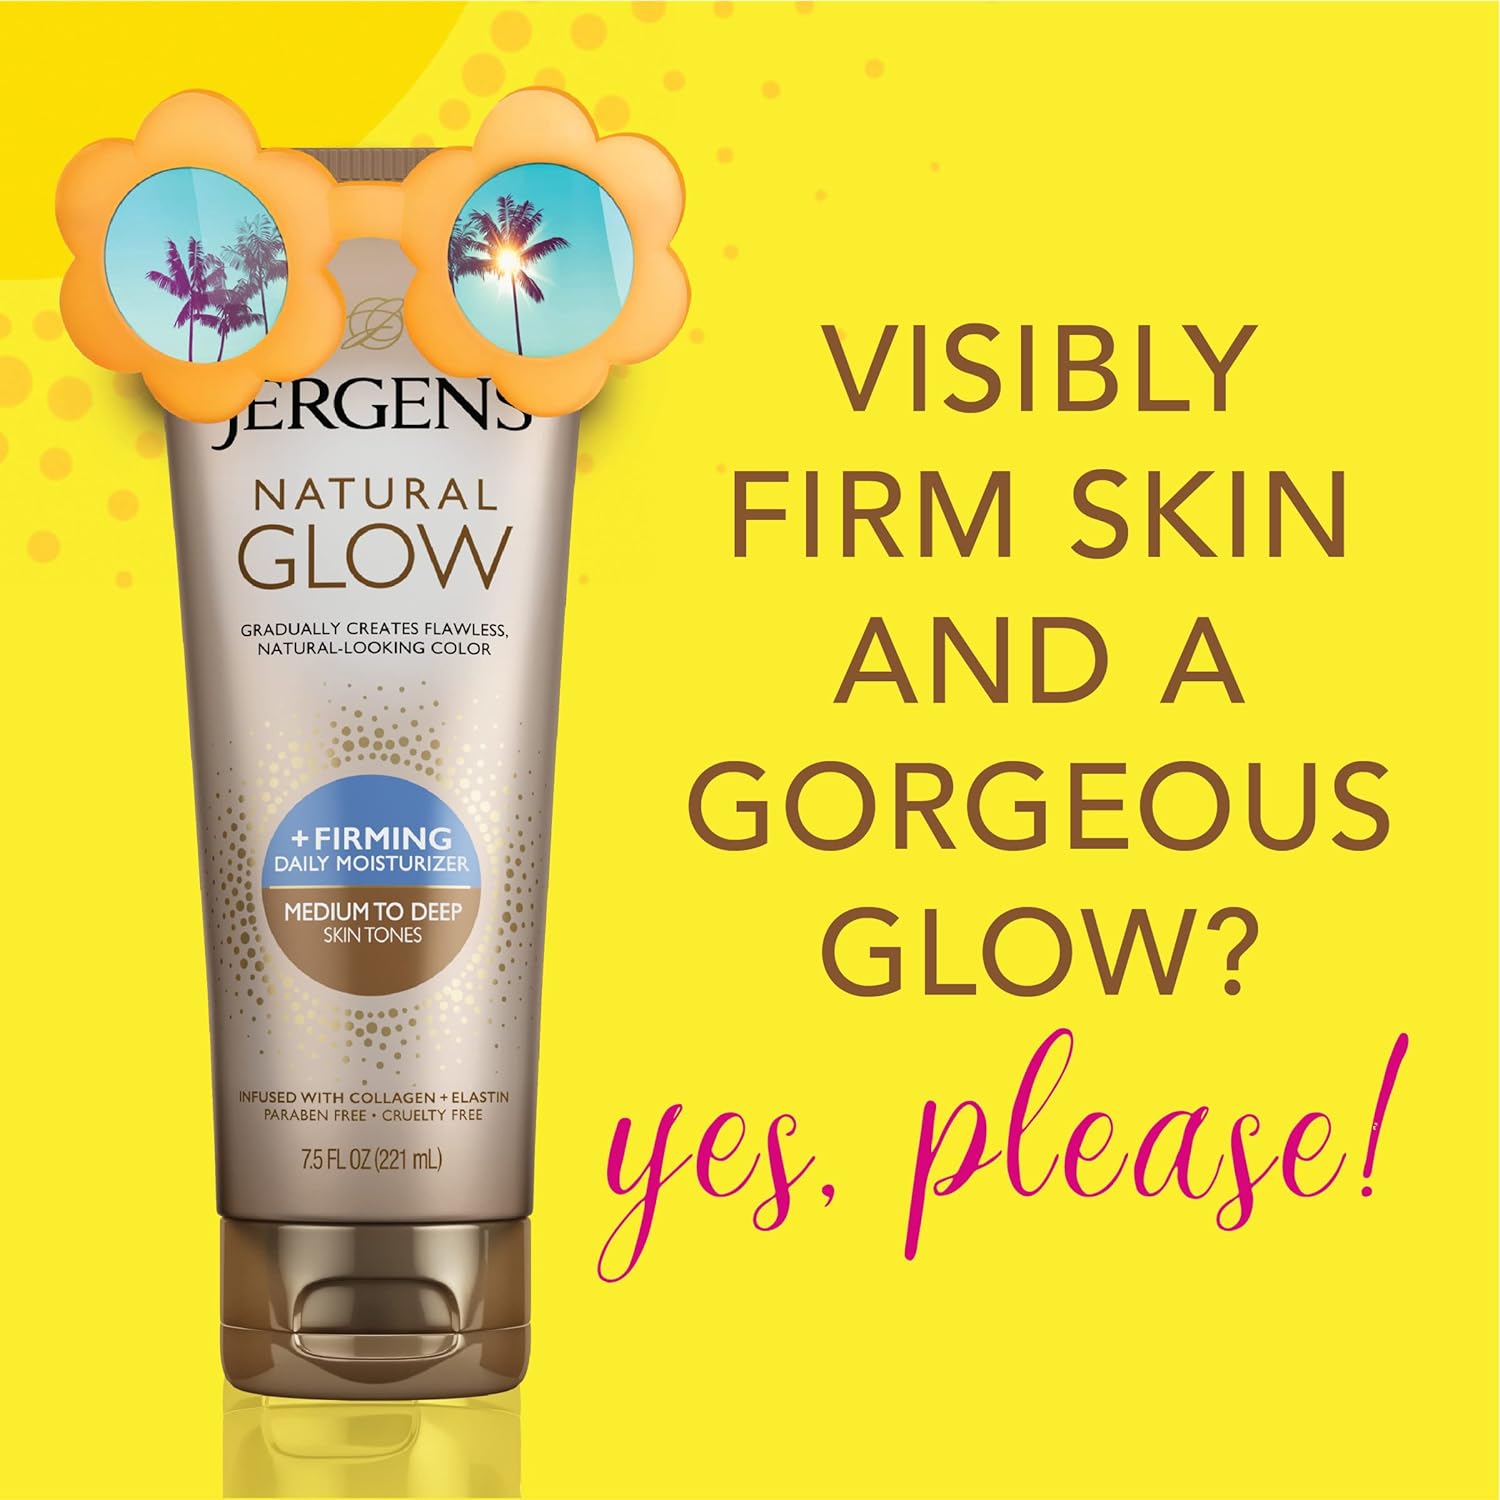 Jergens Natural Glow + Firming Daily Moisturizer Medium to Tan Skin Tones 7.5oz : Beauty & Personal Care